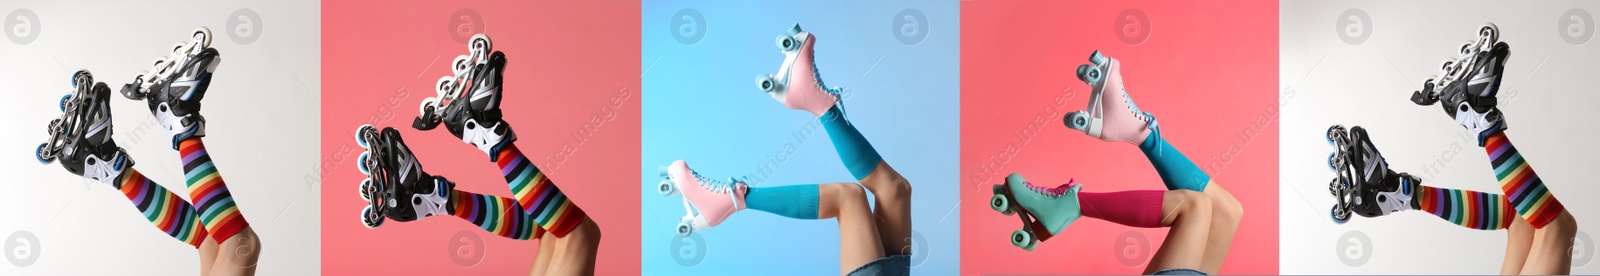 Image of Photos of women with roller skates on different color backgrounds, closeup. Collage banner design